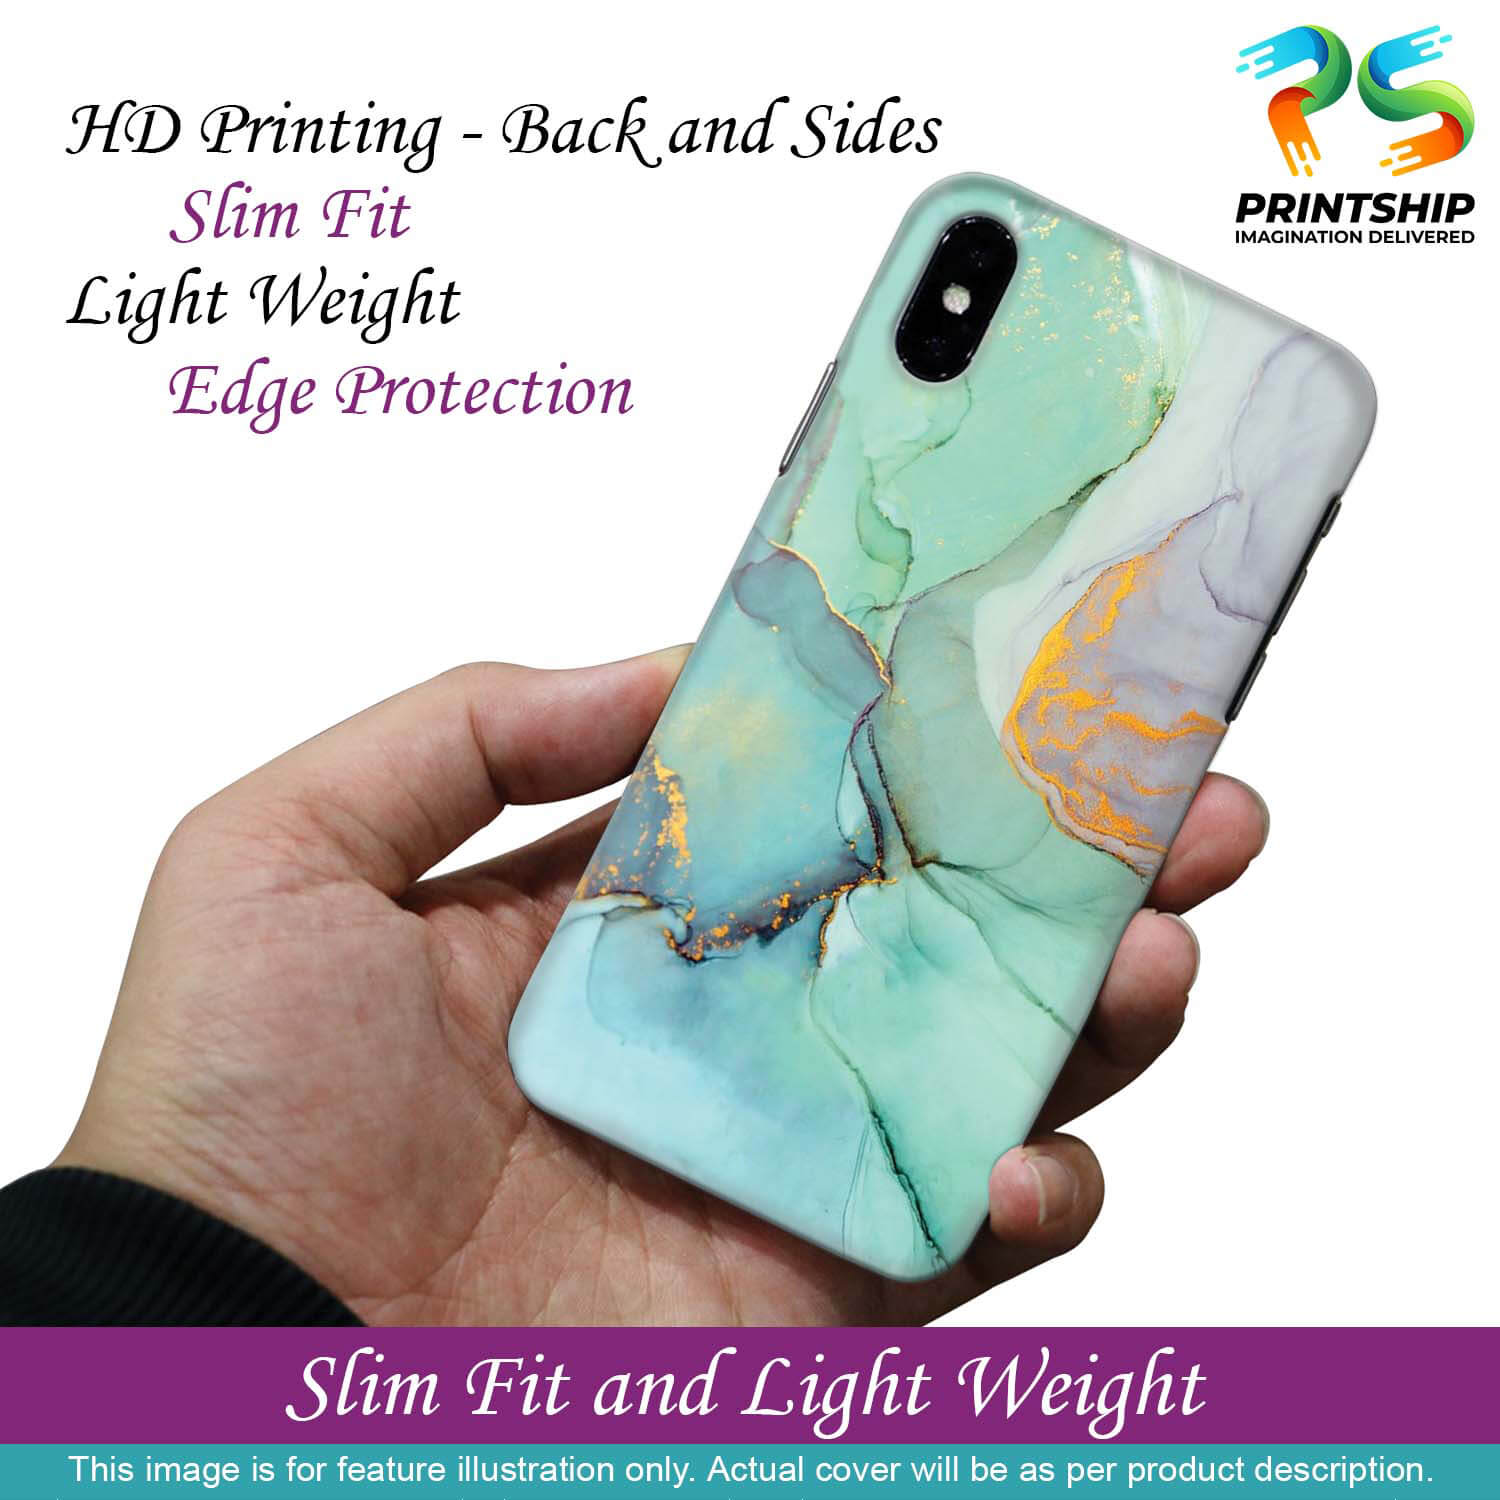 PS1320-Green Marble Premium Back Cover for Xiaomi Poco M2